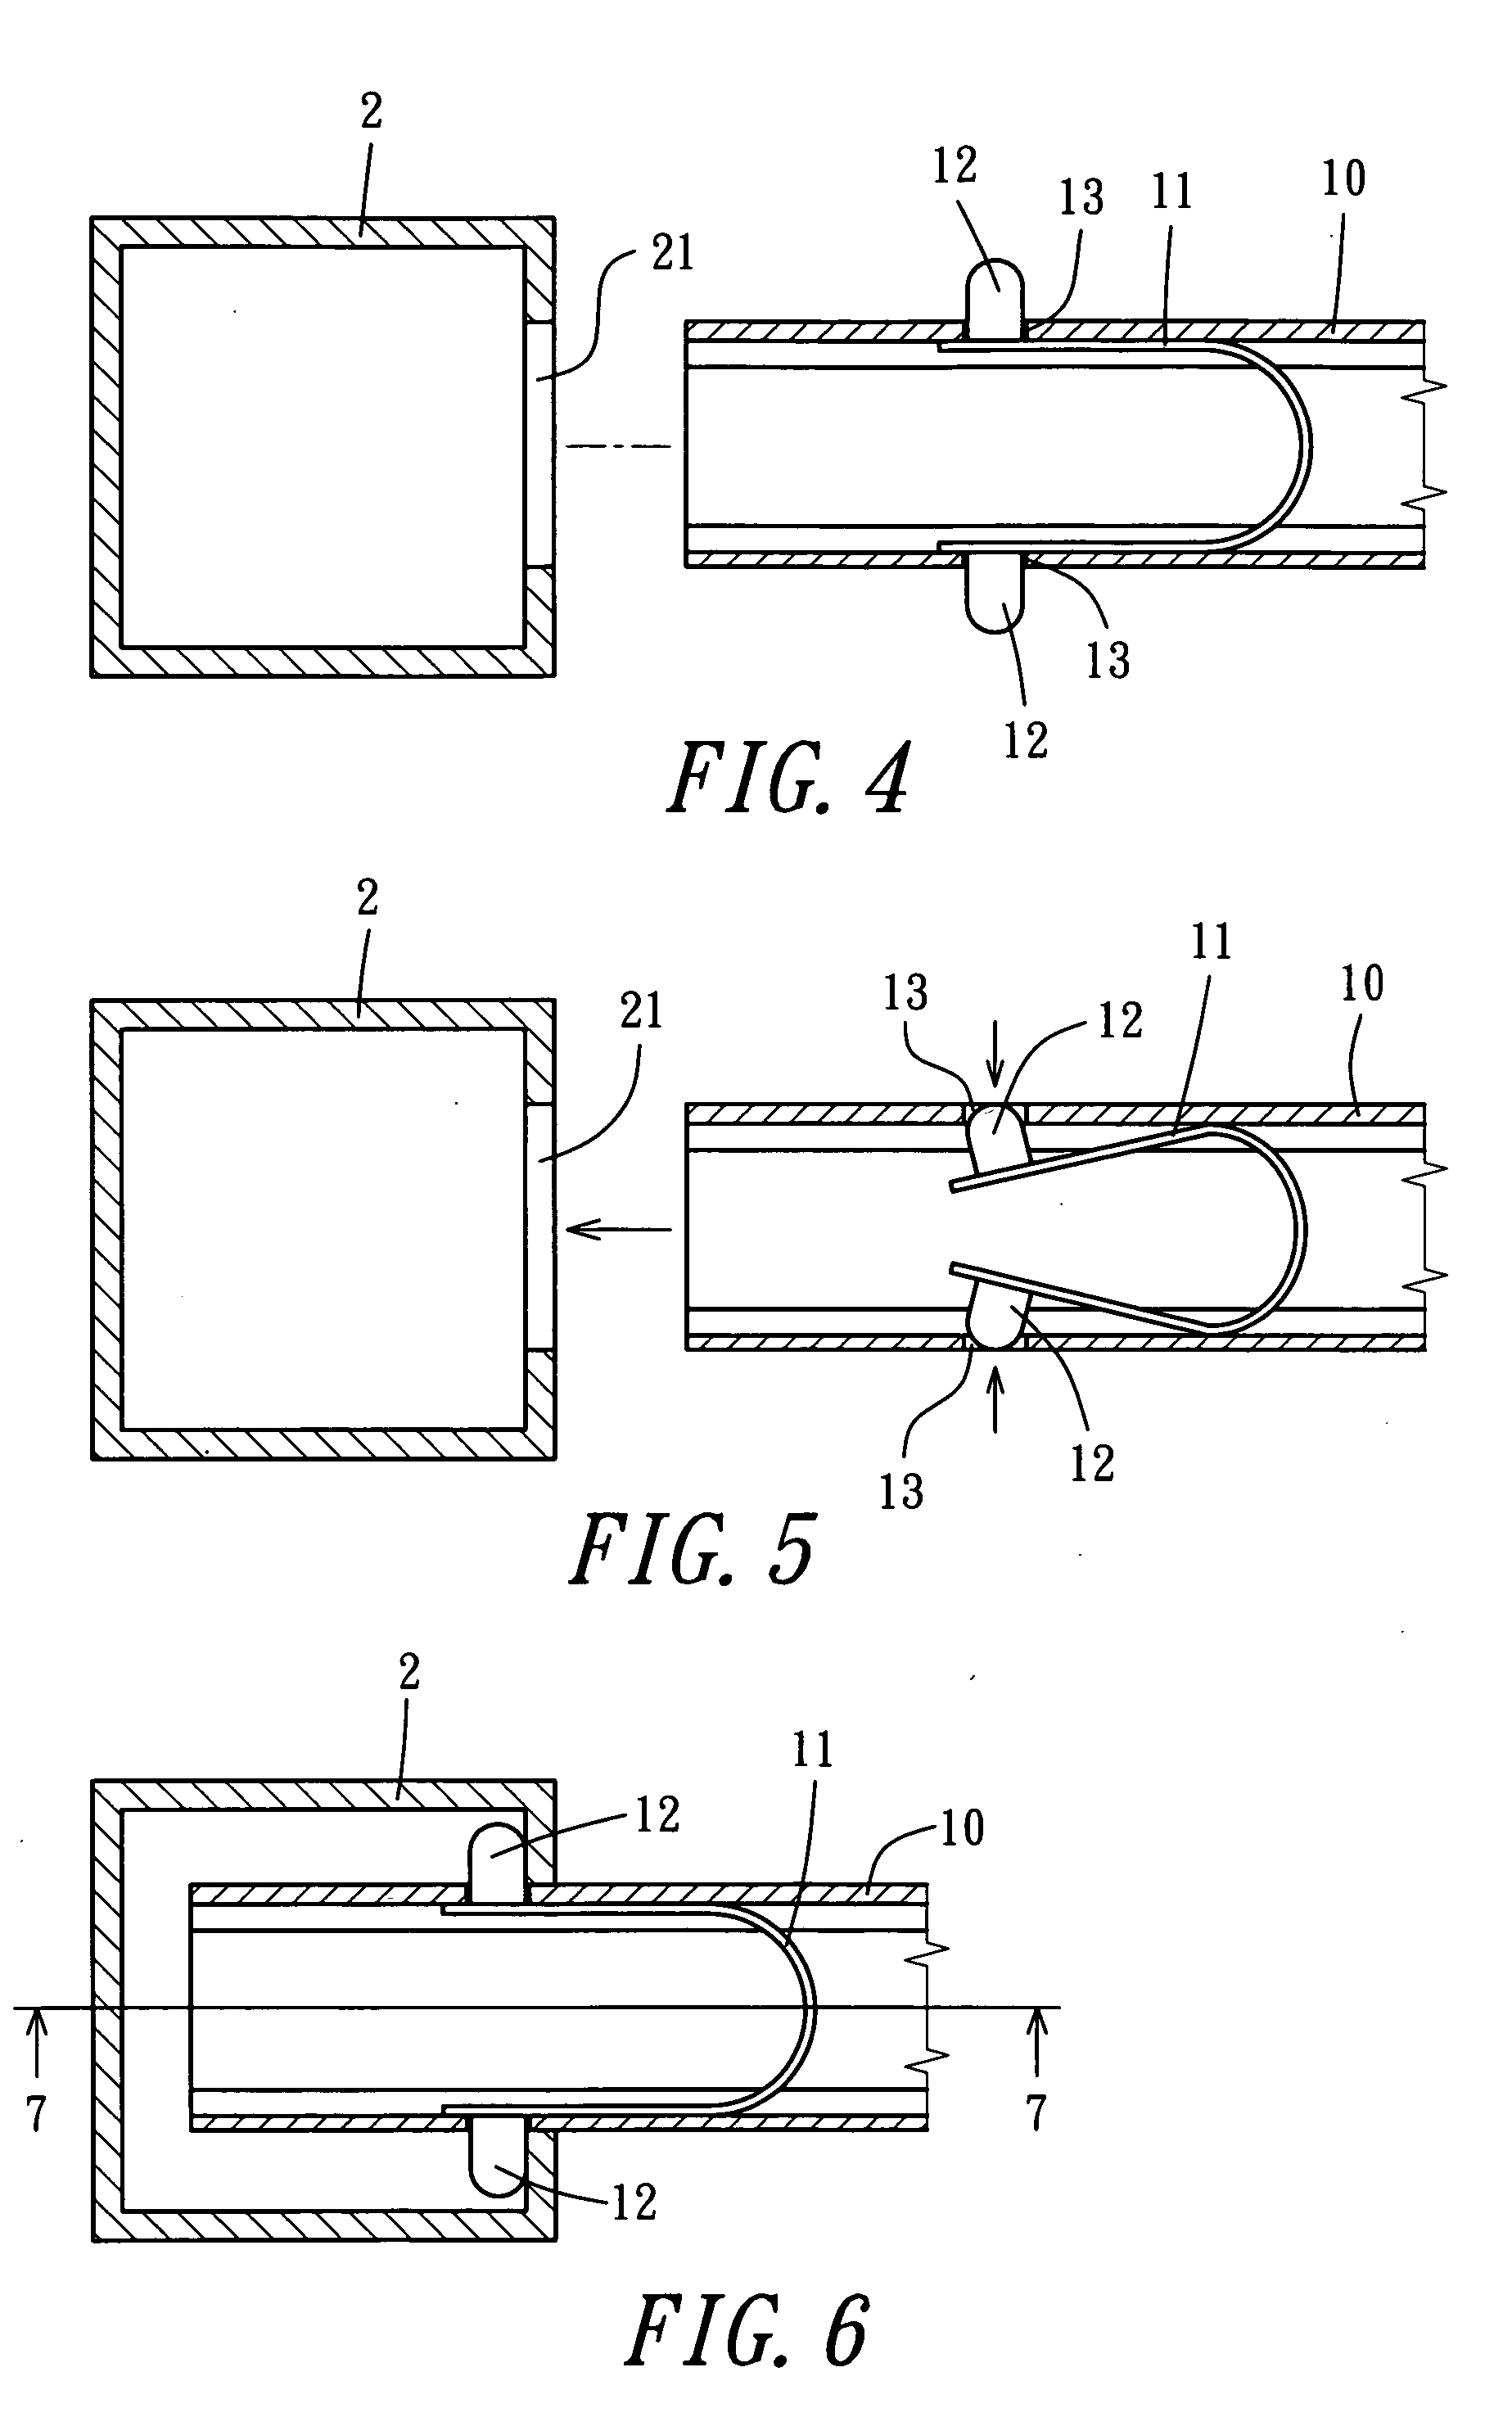 Post and rod linking device for a railing